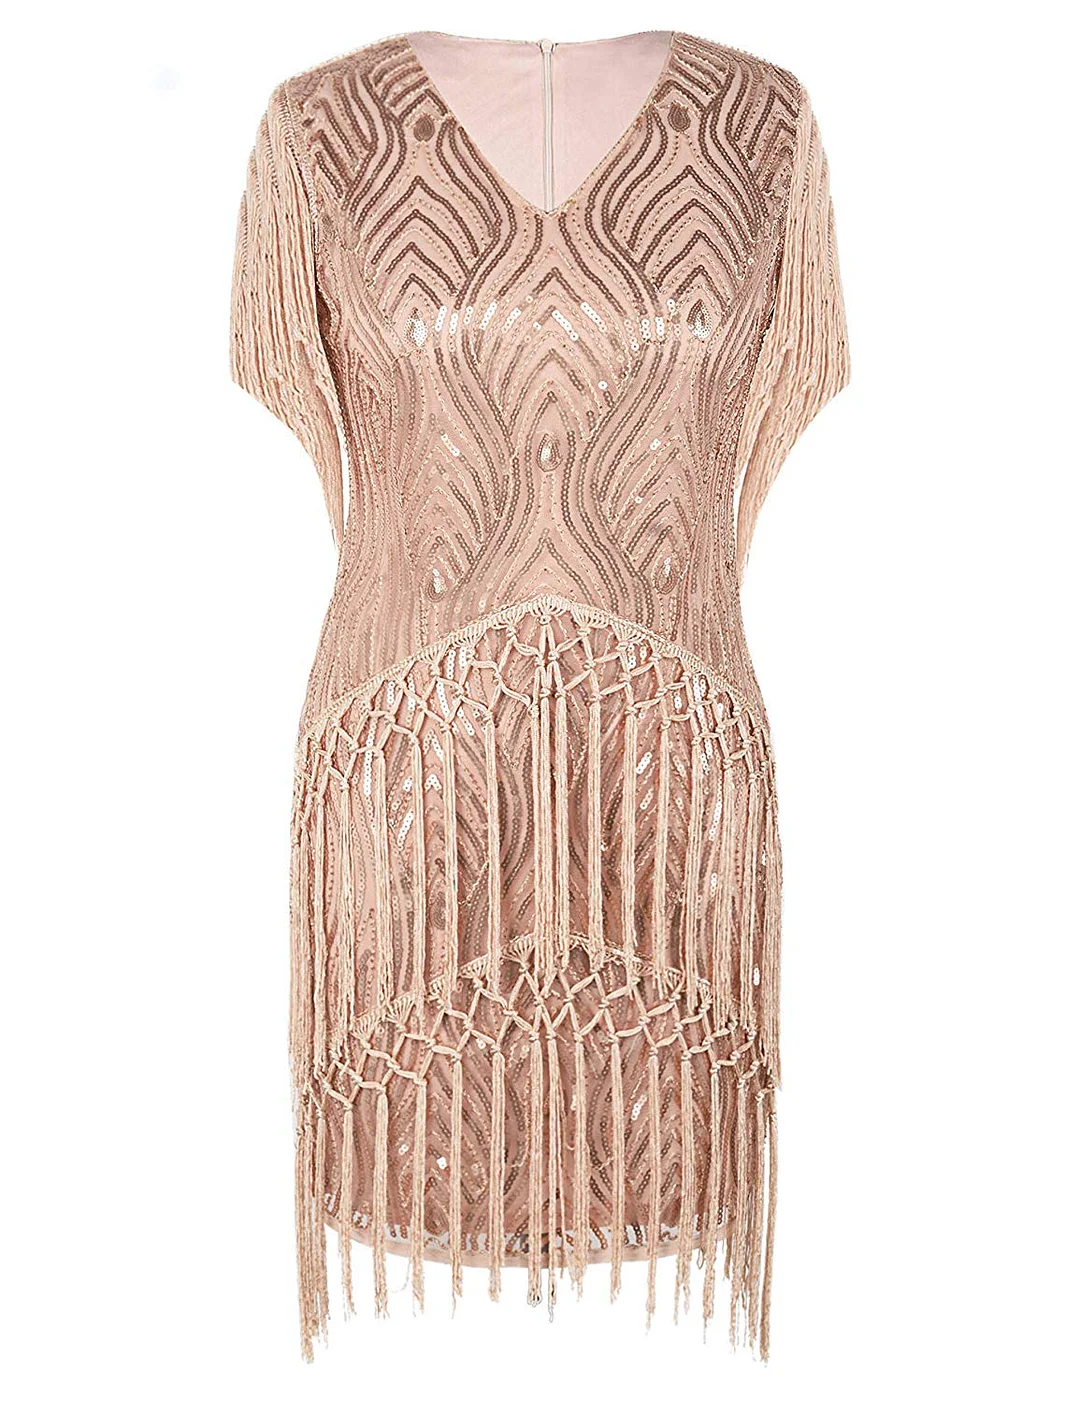 Women's Flapper Dress Hand Braid Fringed Sequined 1920s Inspired Cocktail Dress (Large Rose Gold)